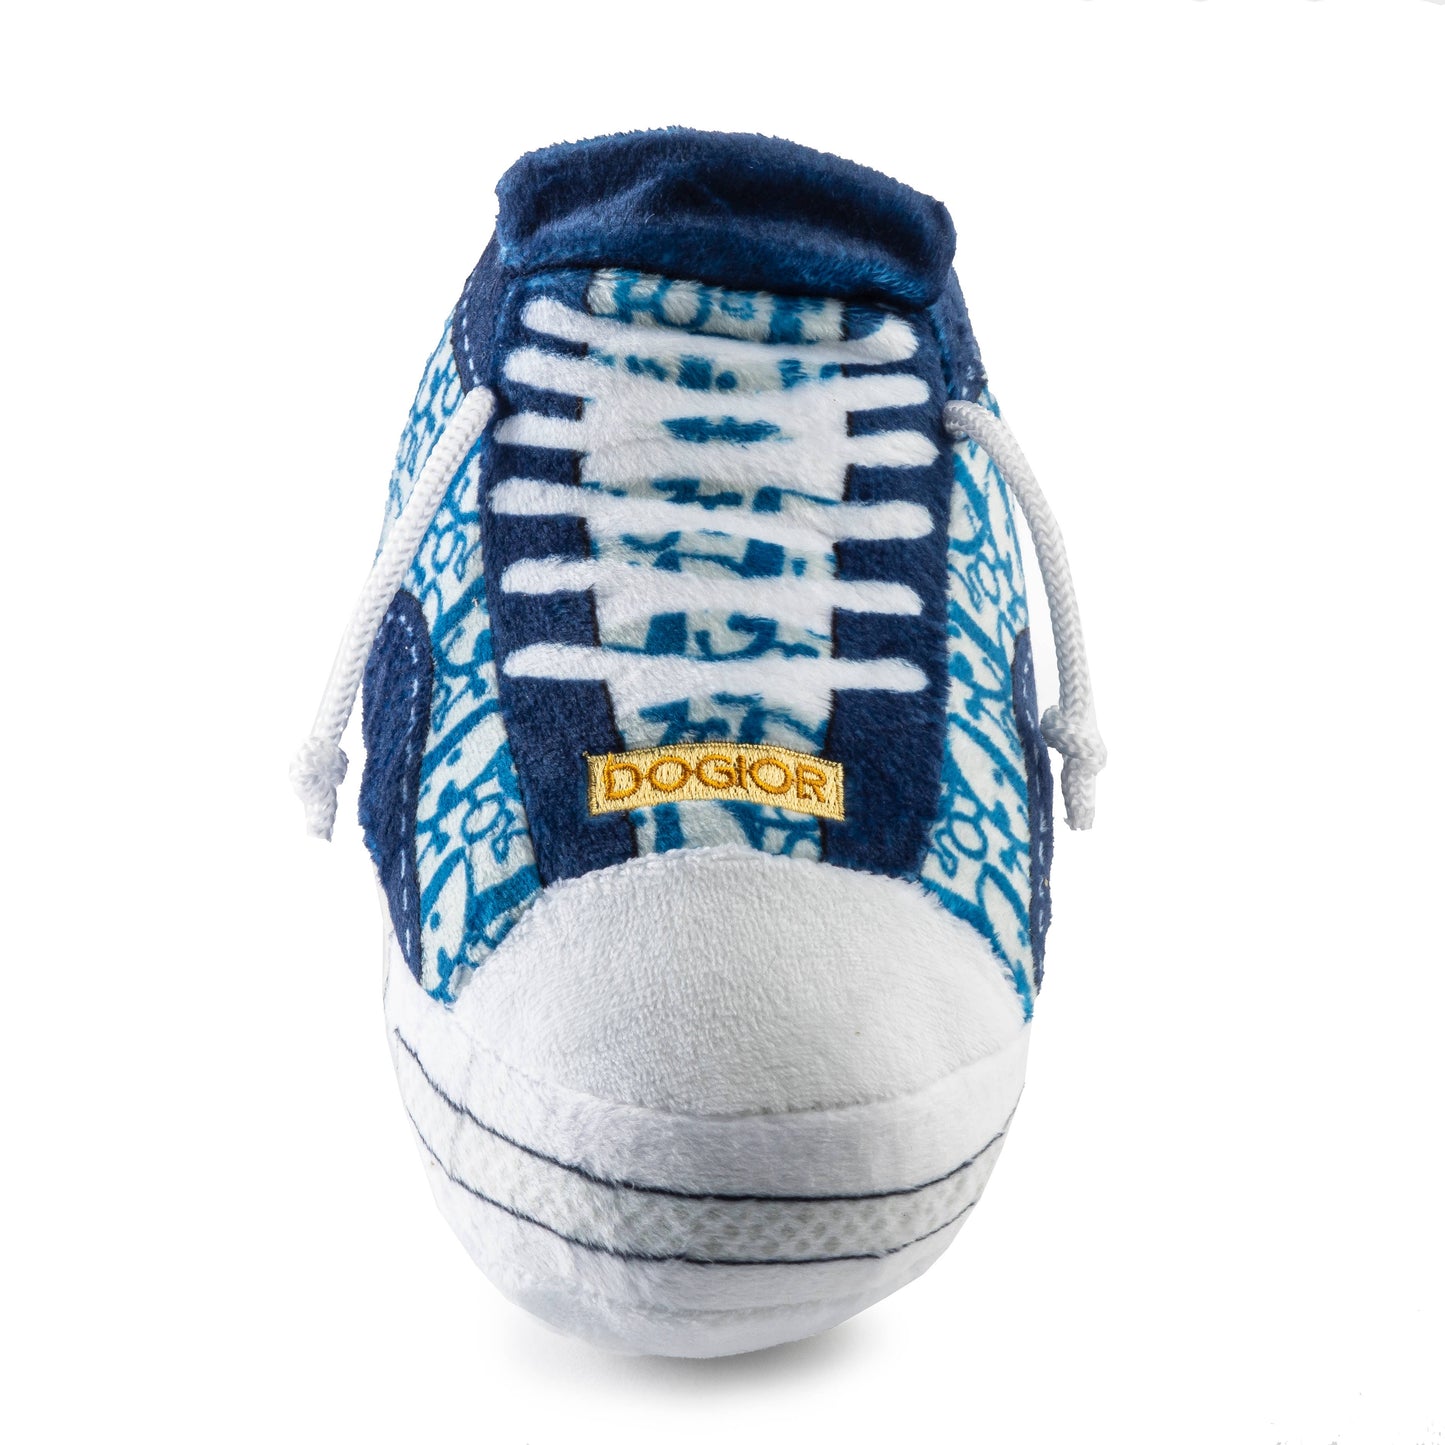 Load image into Gallery viewer, Haute Diggity Dog - Dogior High-Top Tennis Shoe dog Toy  Image
